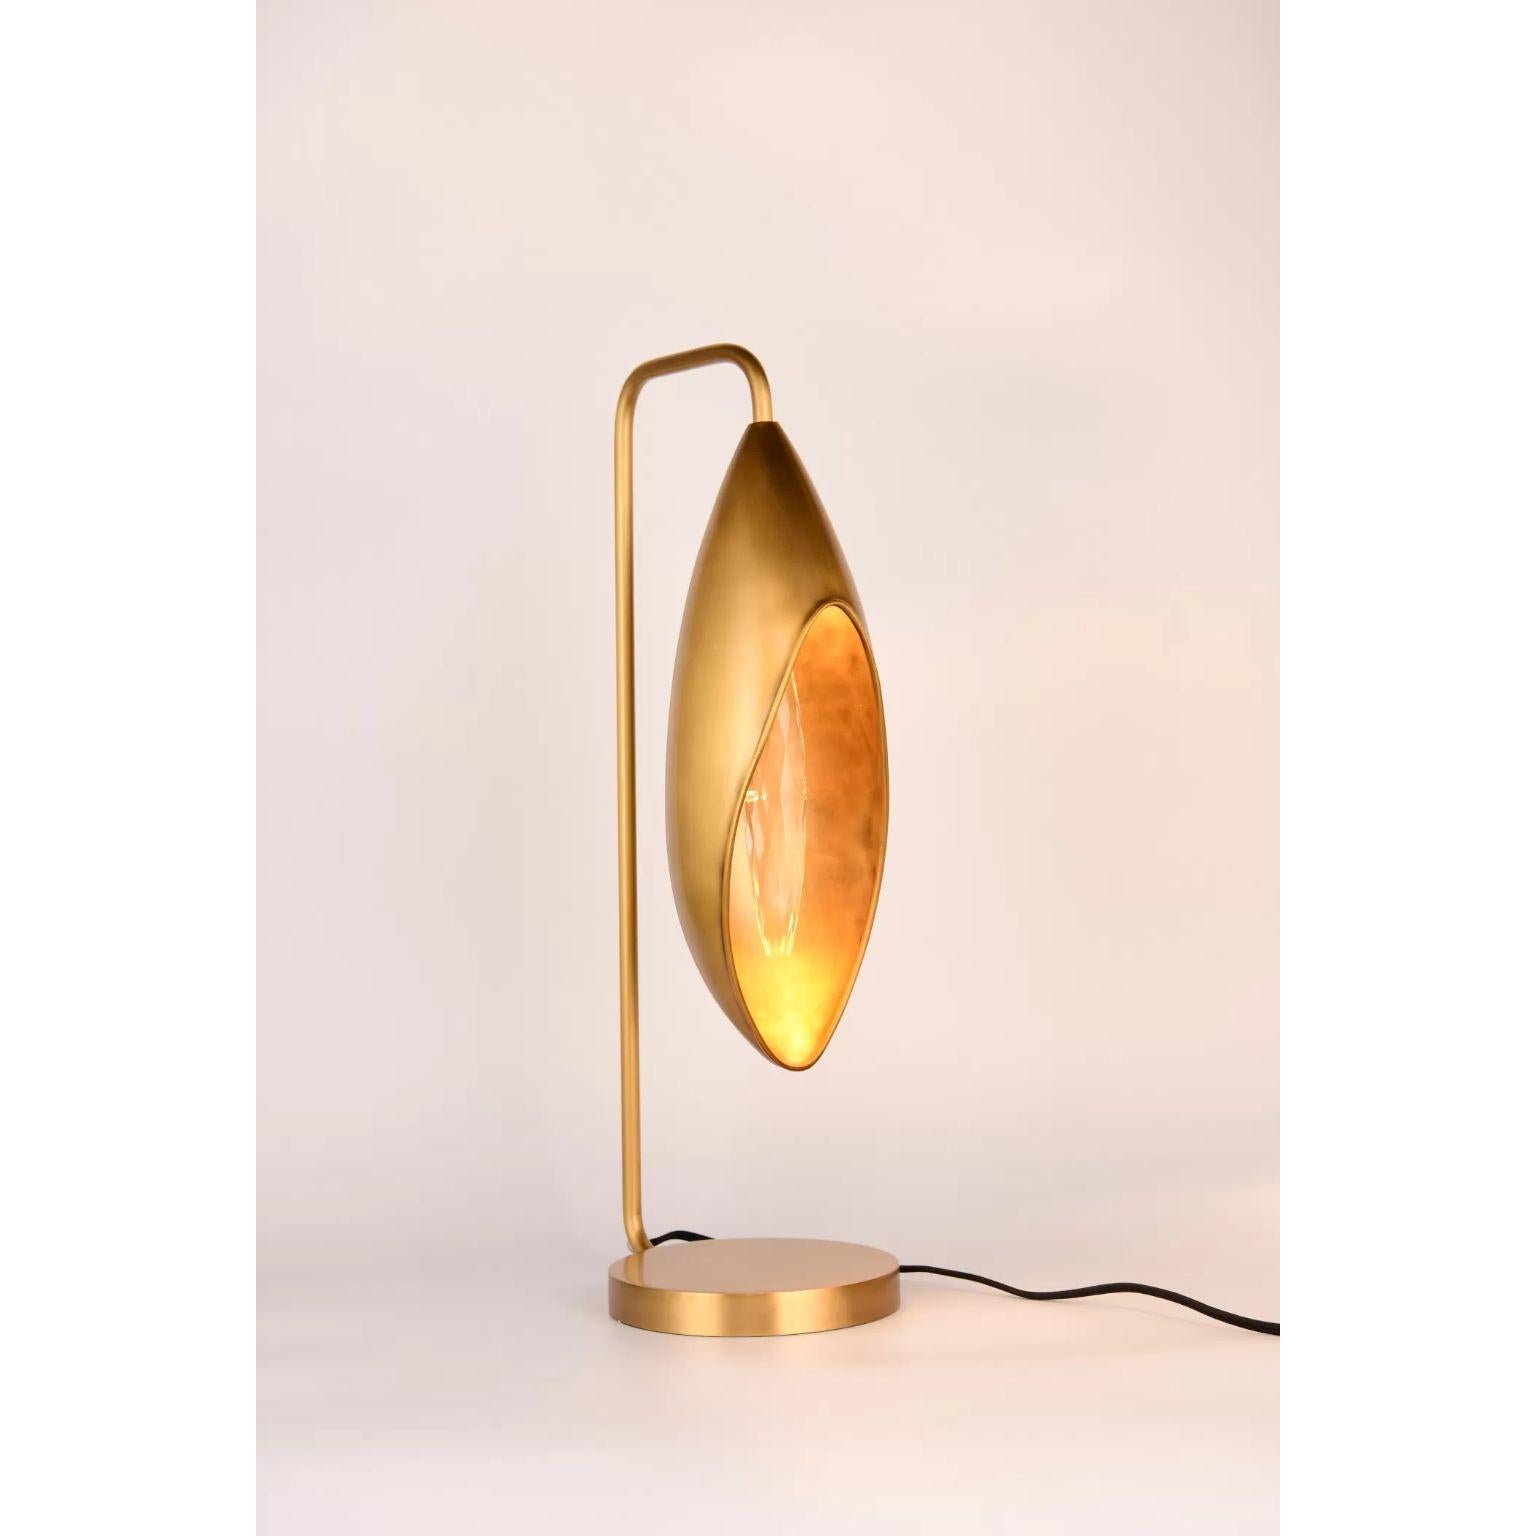 Lilly Table Lamp by Dainte
Dimensions: Ø 22 x H 70 cm.
Materials: Crystal and brass. 

The Lily Collection is minimal, modern, and textured. It embodies the lily flower’s pure beauty and is made of textured brass. The collection illustrates